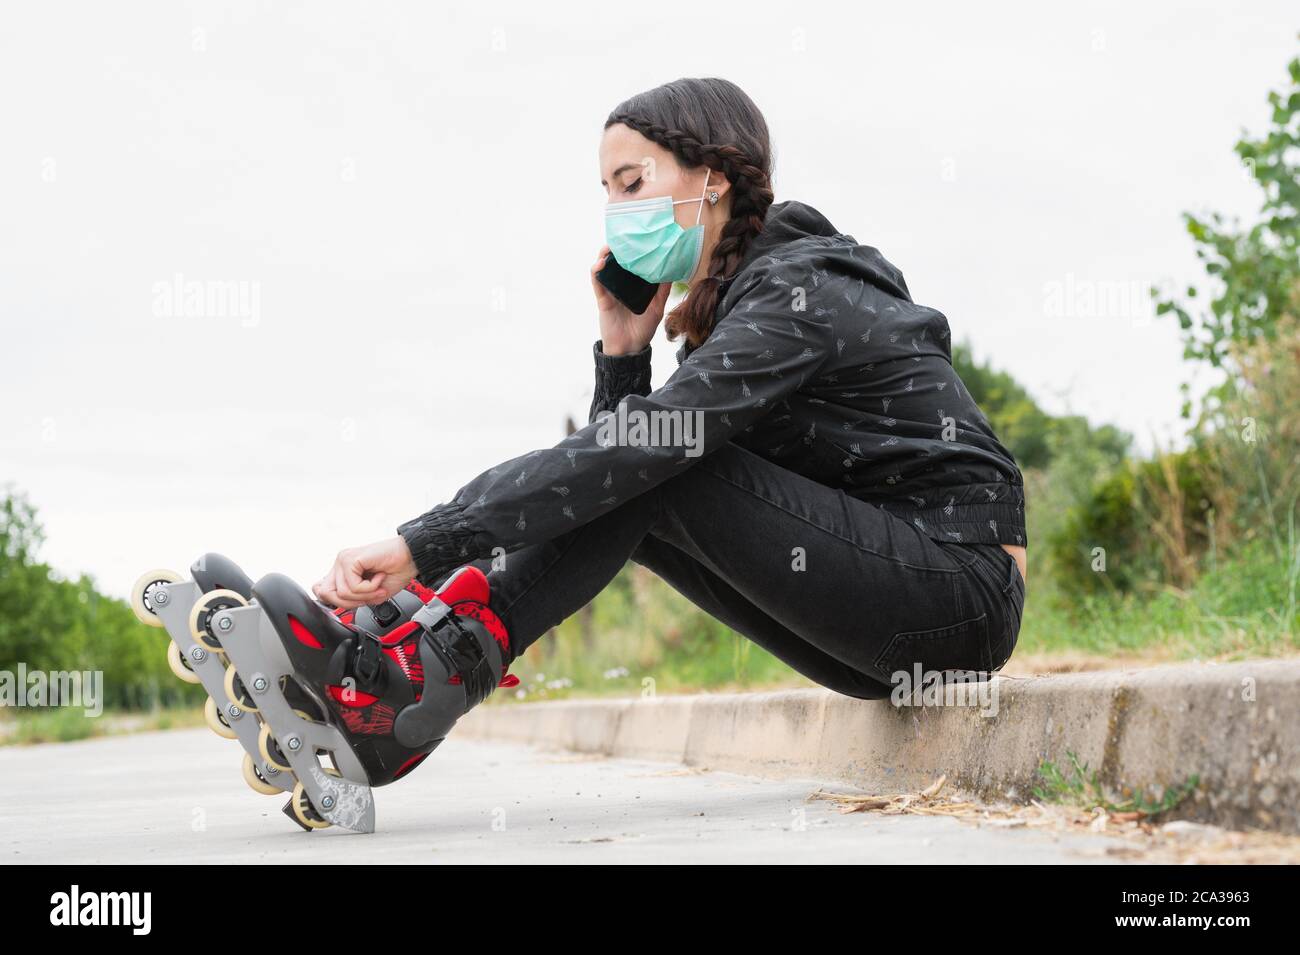 Woman in protective face mask on roller skating pause, sitting on the street and using mobile phone during coronavirus pandemic outbreak. Urban Girl Stock Photo